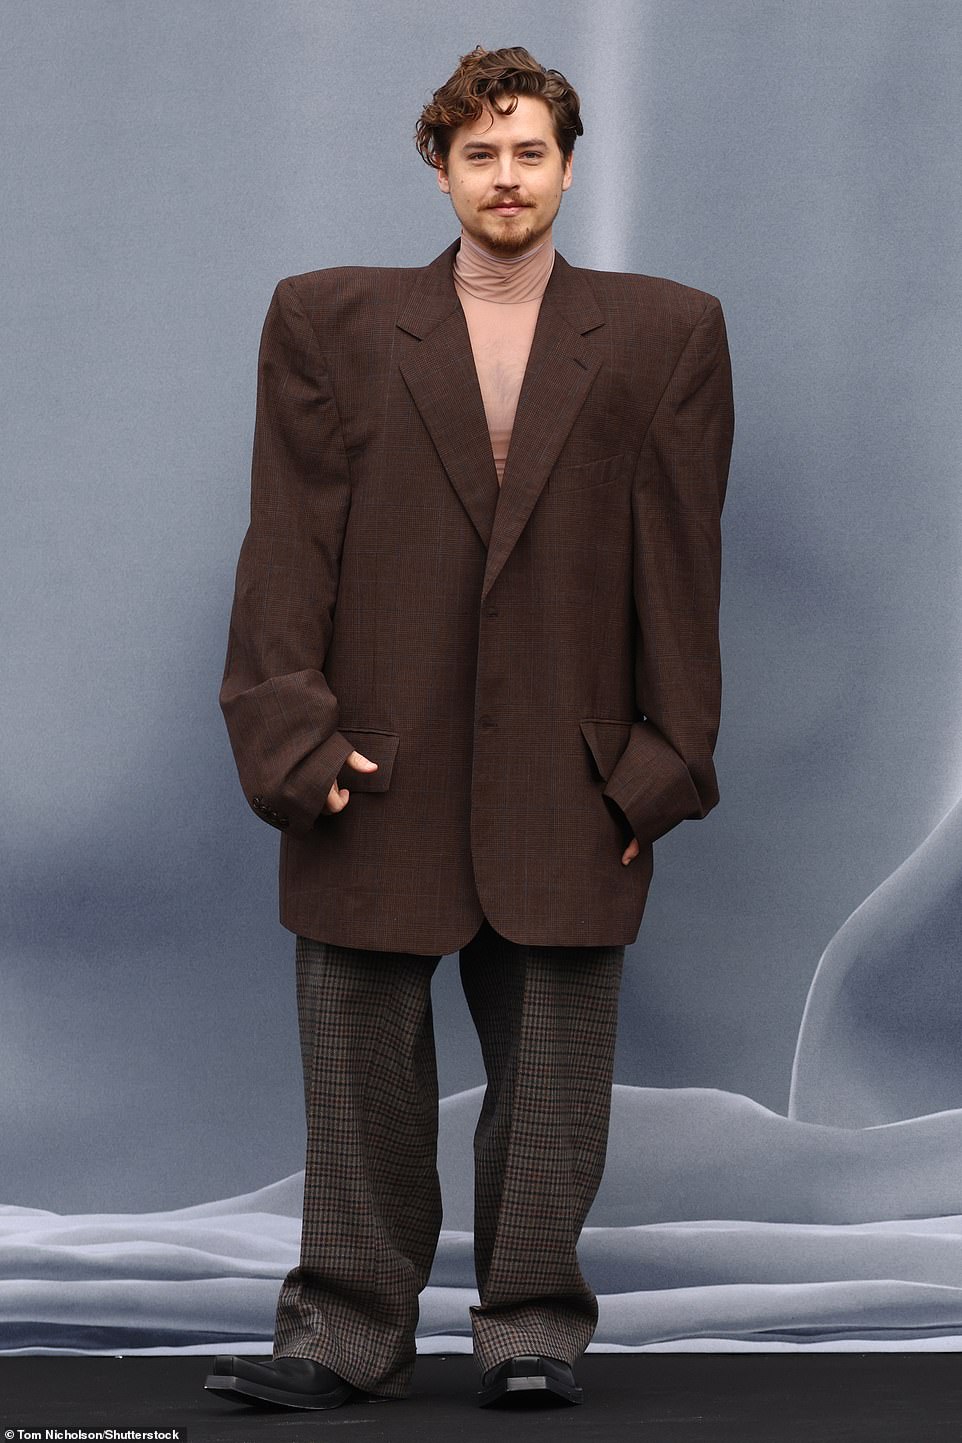 Cole Sprouse wore a brown suit